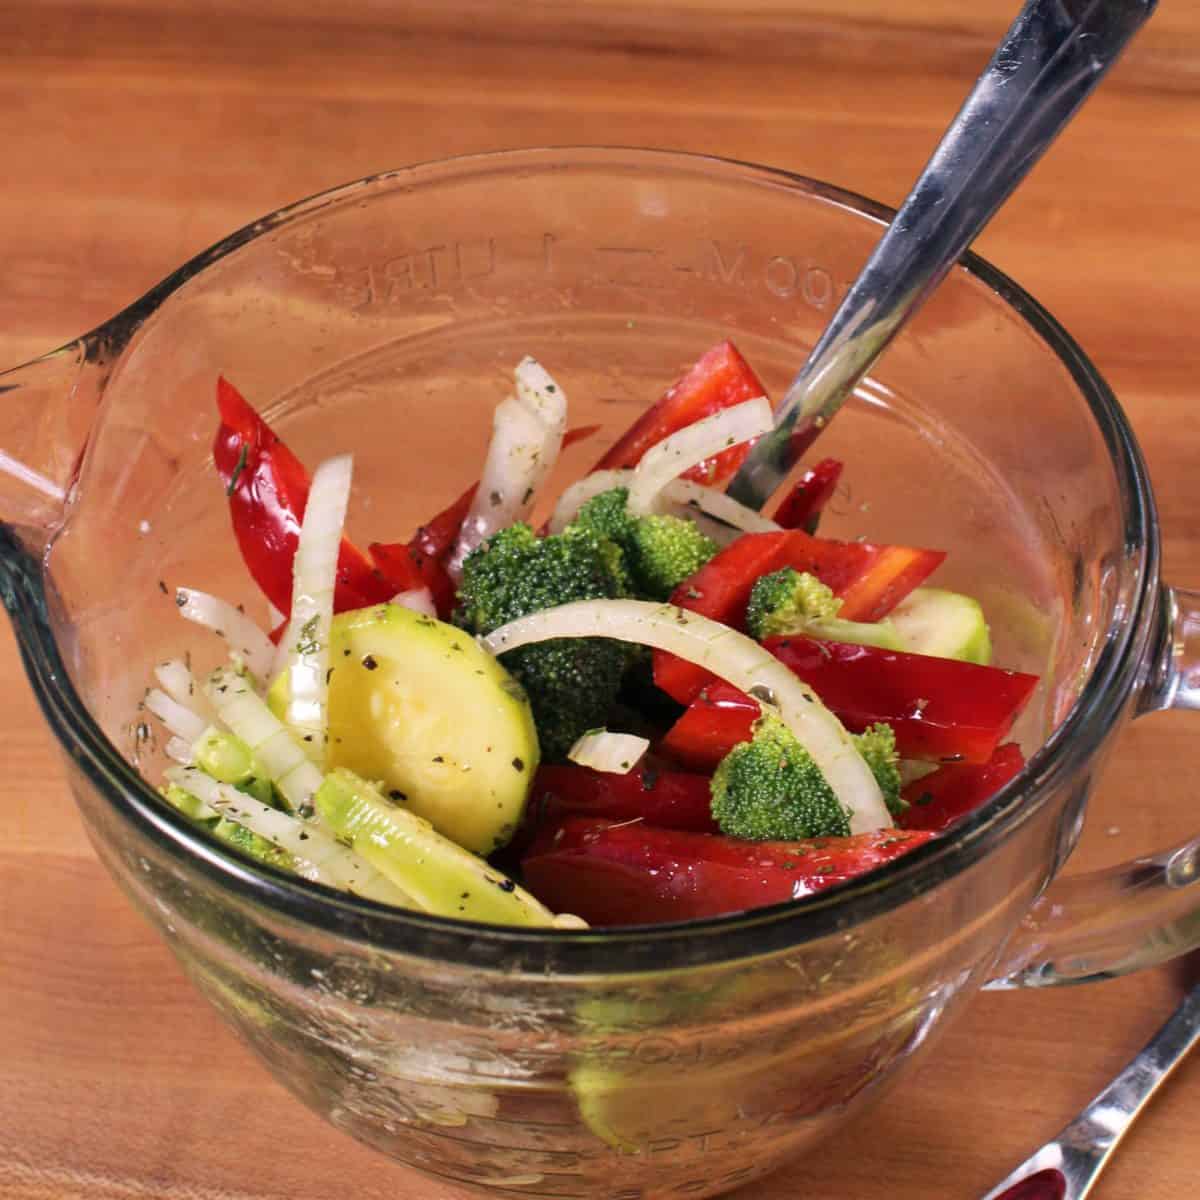 a bowl of mixed vegetables on a brown table.